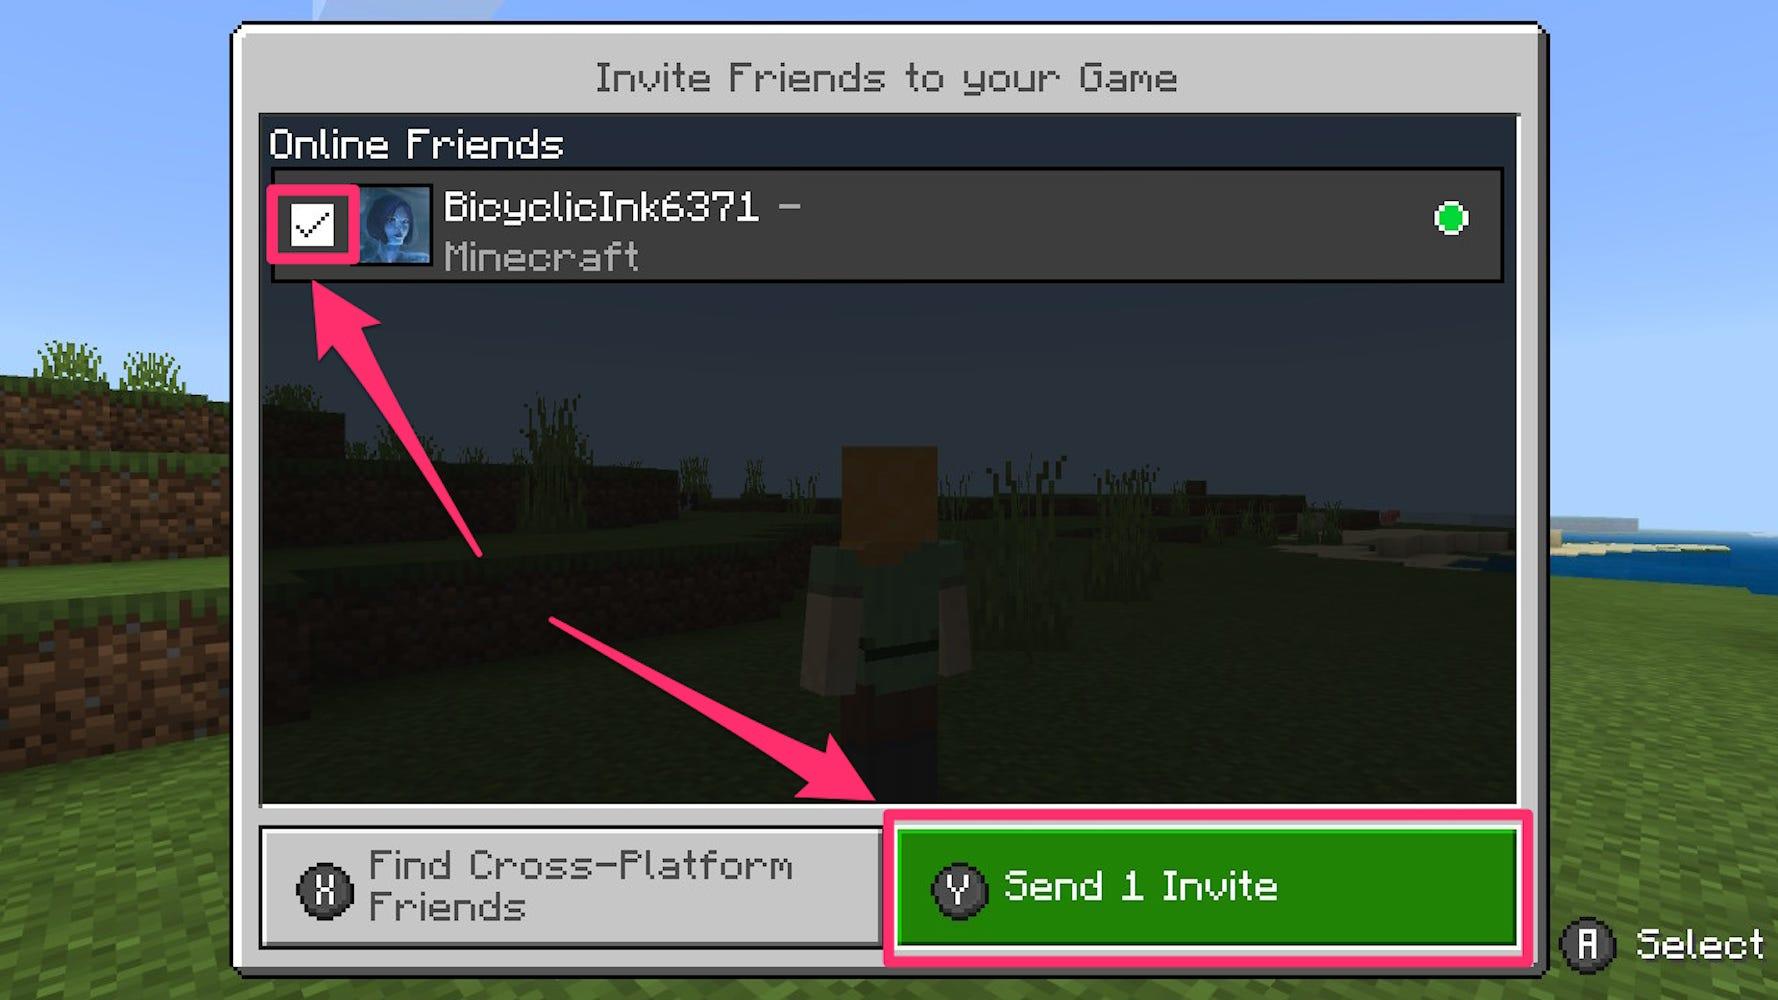 Minecraft's 'Better Together' Beta lets you play with friends across  Windows 10 and Android devices